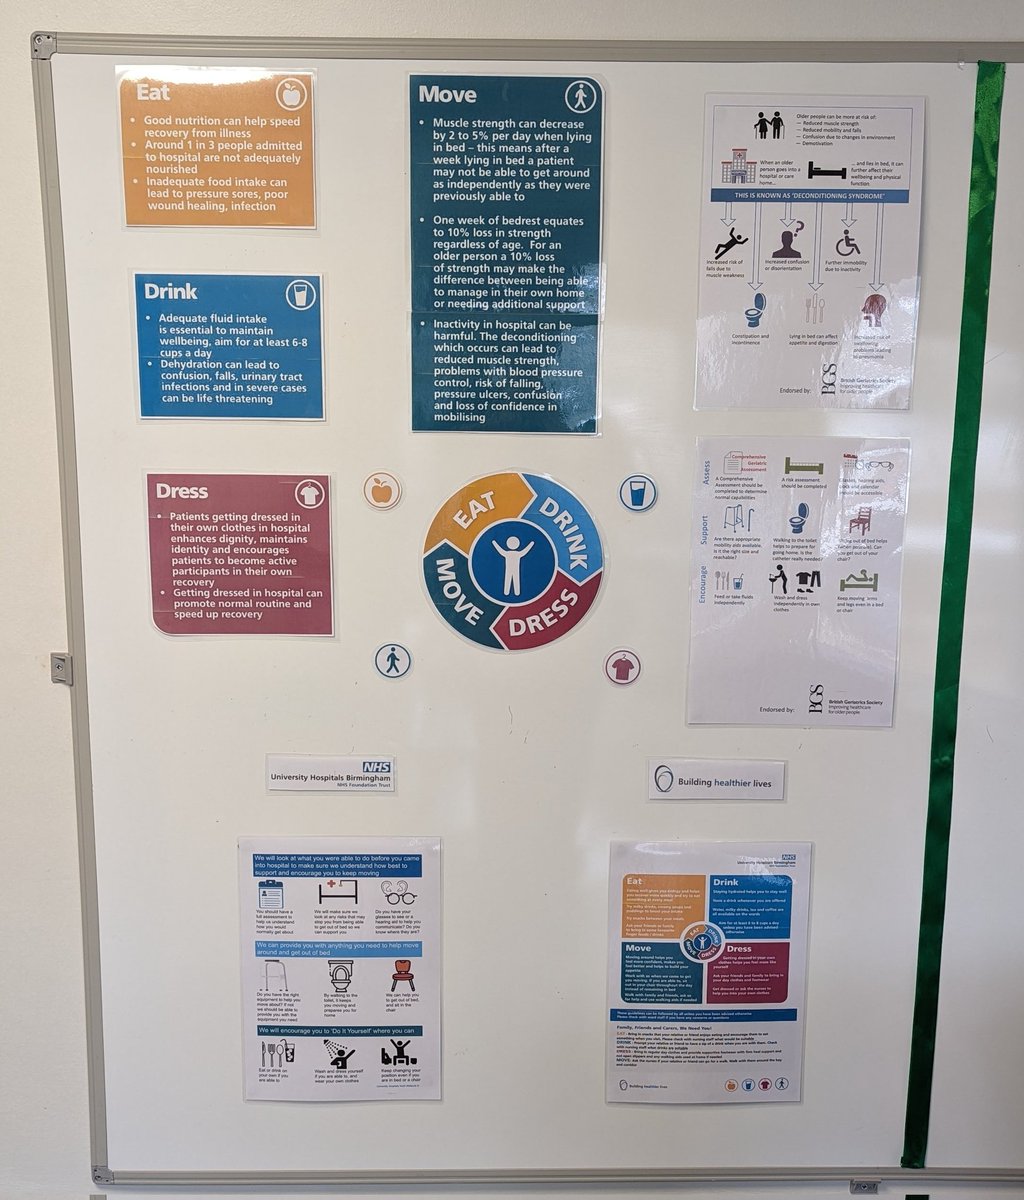 @Jacquih0lmes @uhbtrust @UHBTherapy @TeamHCOPUHB @RachelG61601556 Ward 3 at GHH are looking forward to your new page so they can add even more info to their new #eatdrinkdressmove display board. #goodhopehospital @uhbtrust @simonewrenn